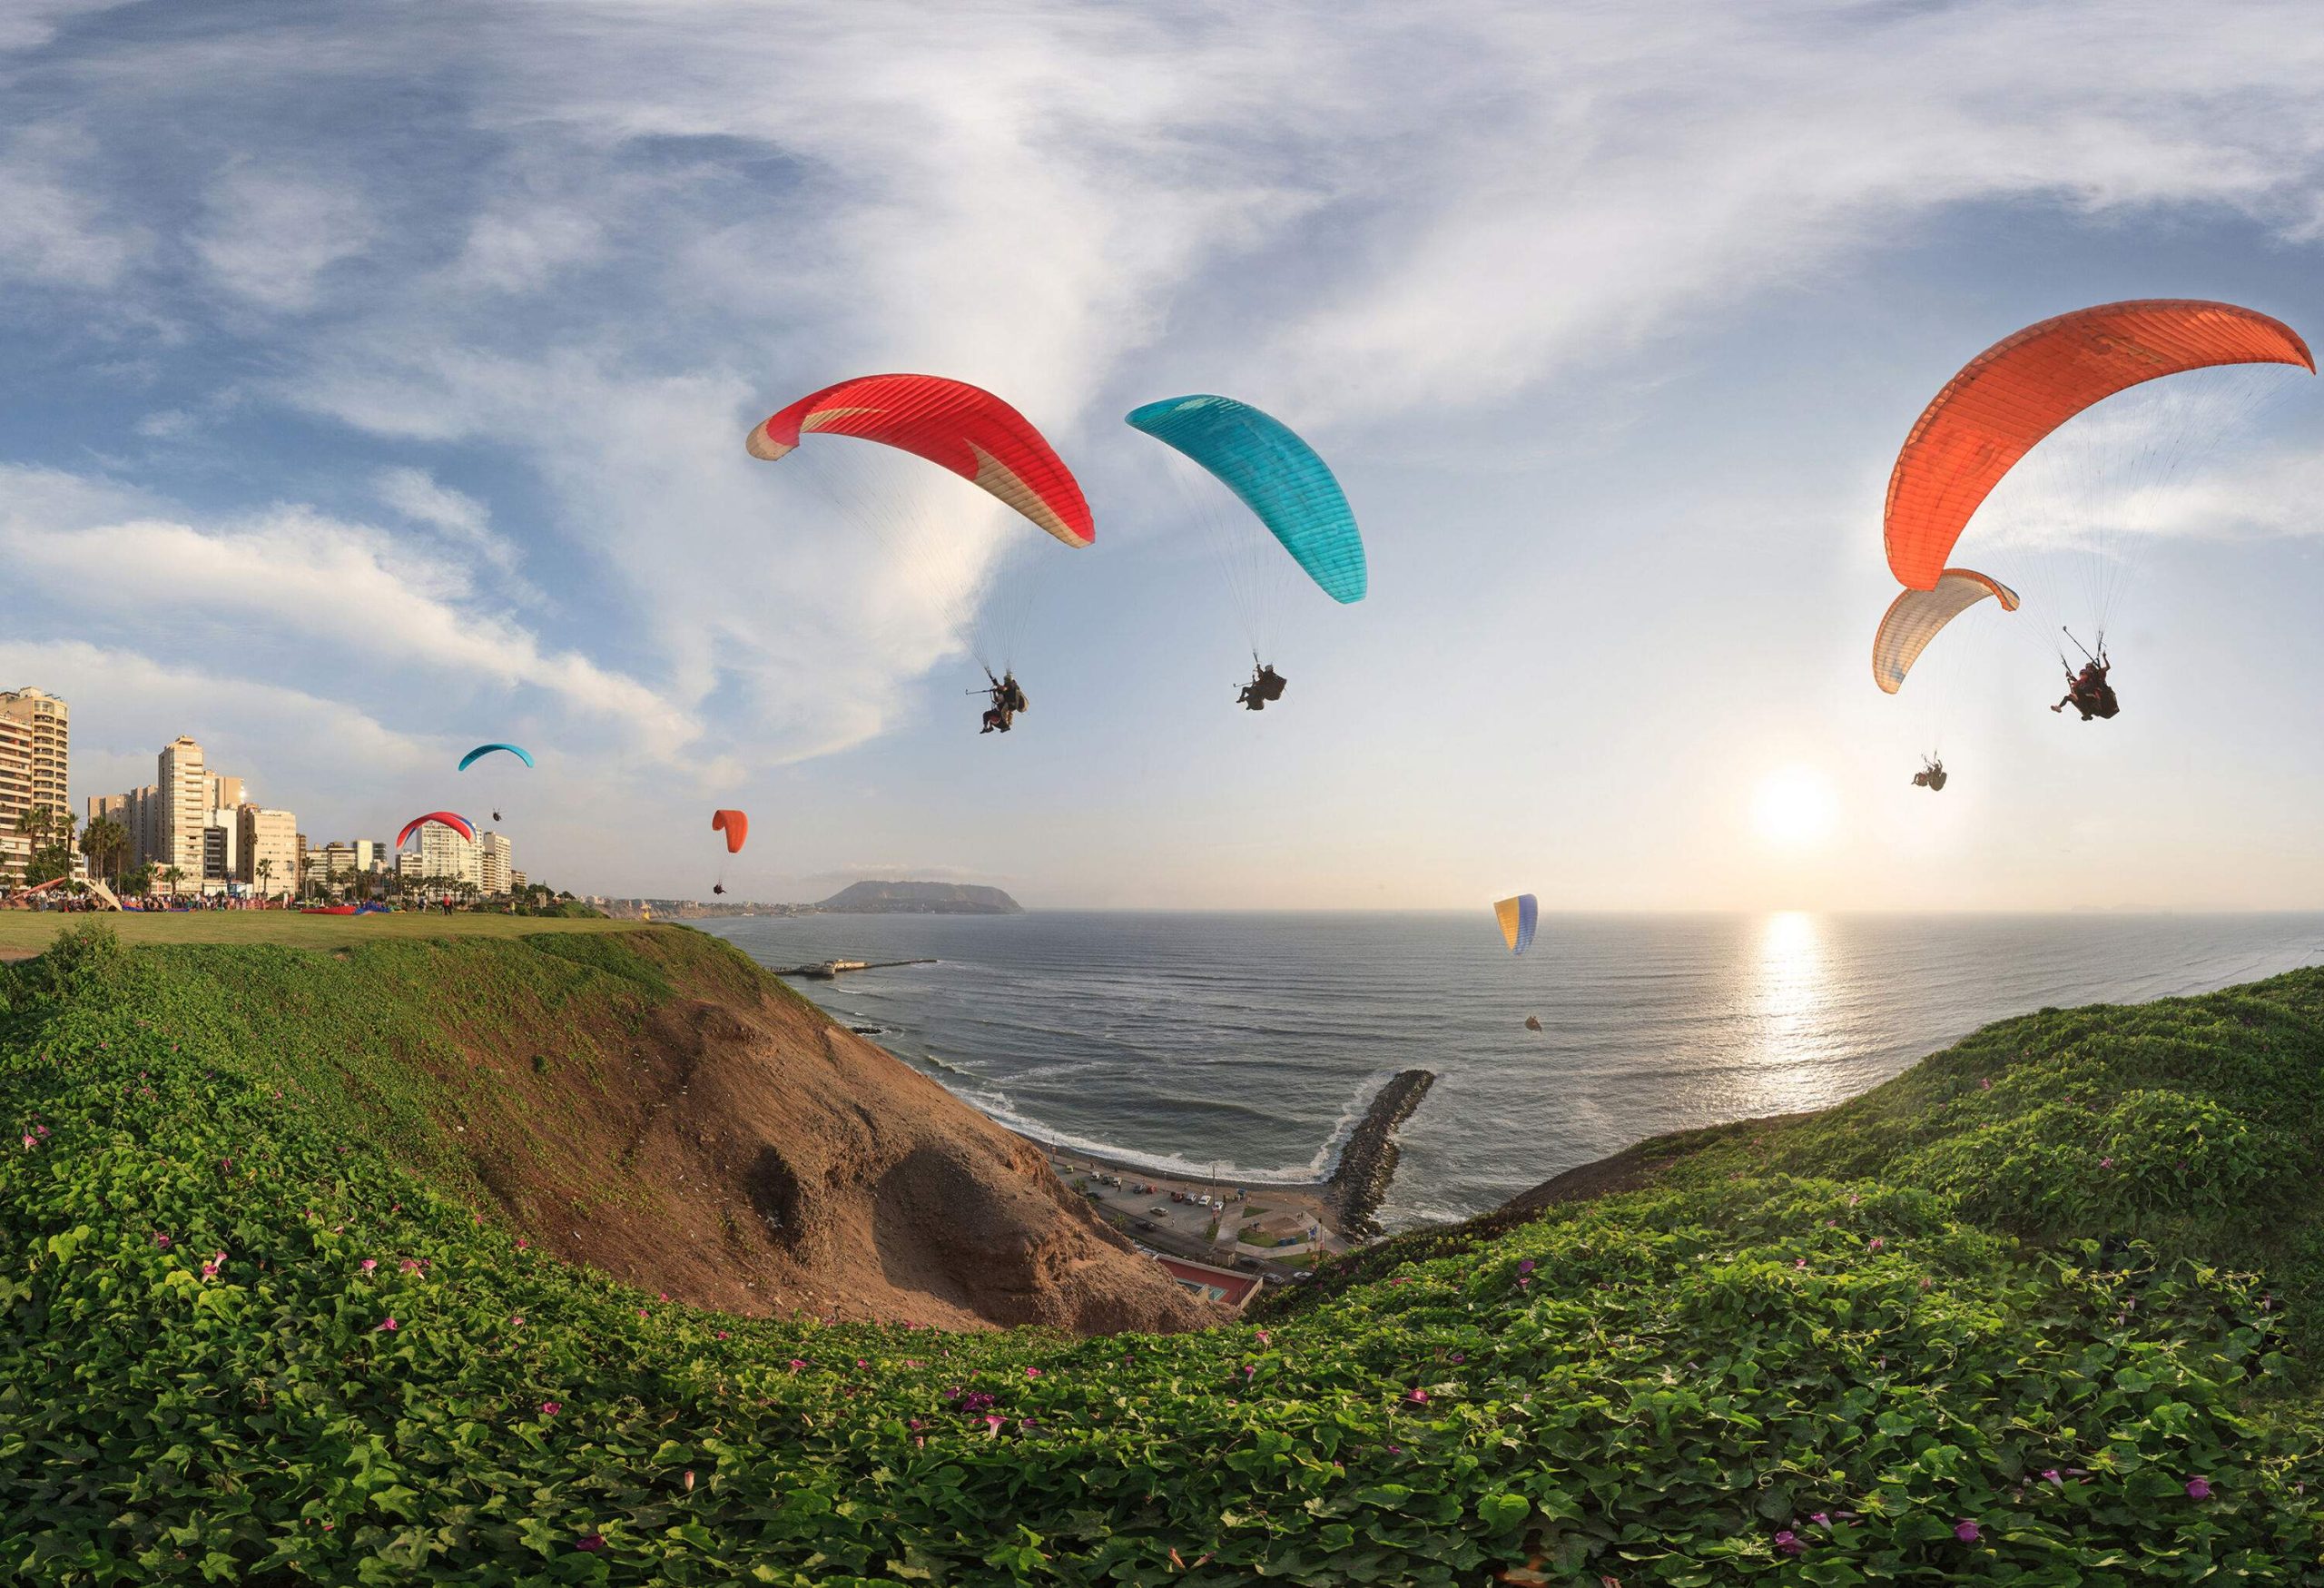 Colourful canopies of paragliders dotting the sky over the sea and surrounding cliffs.